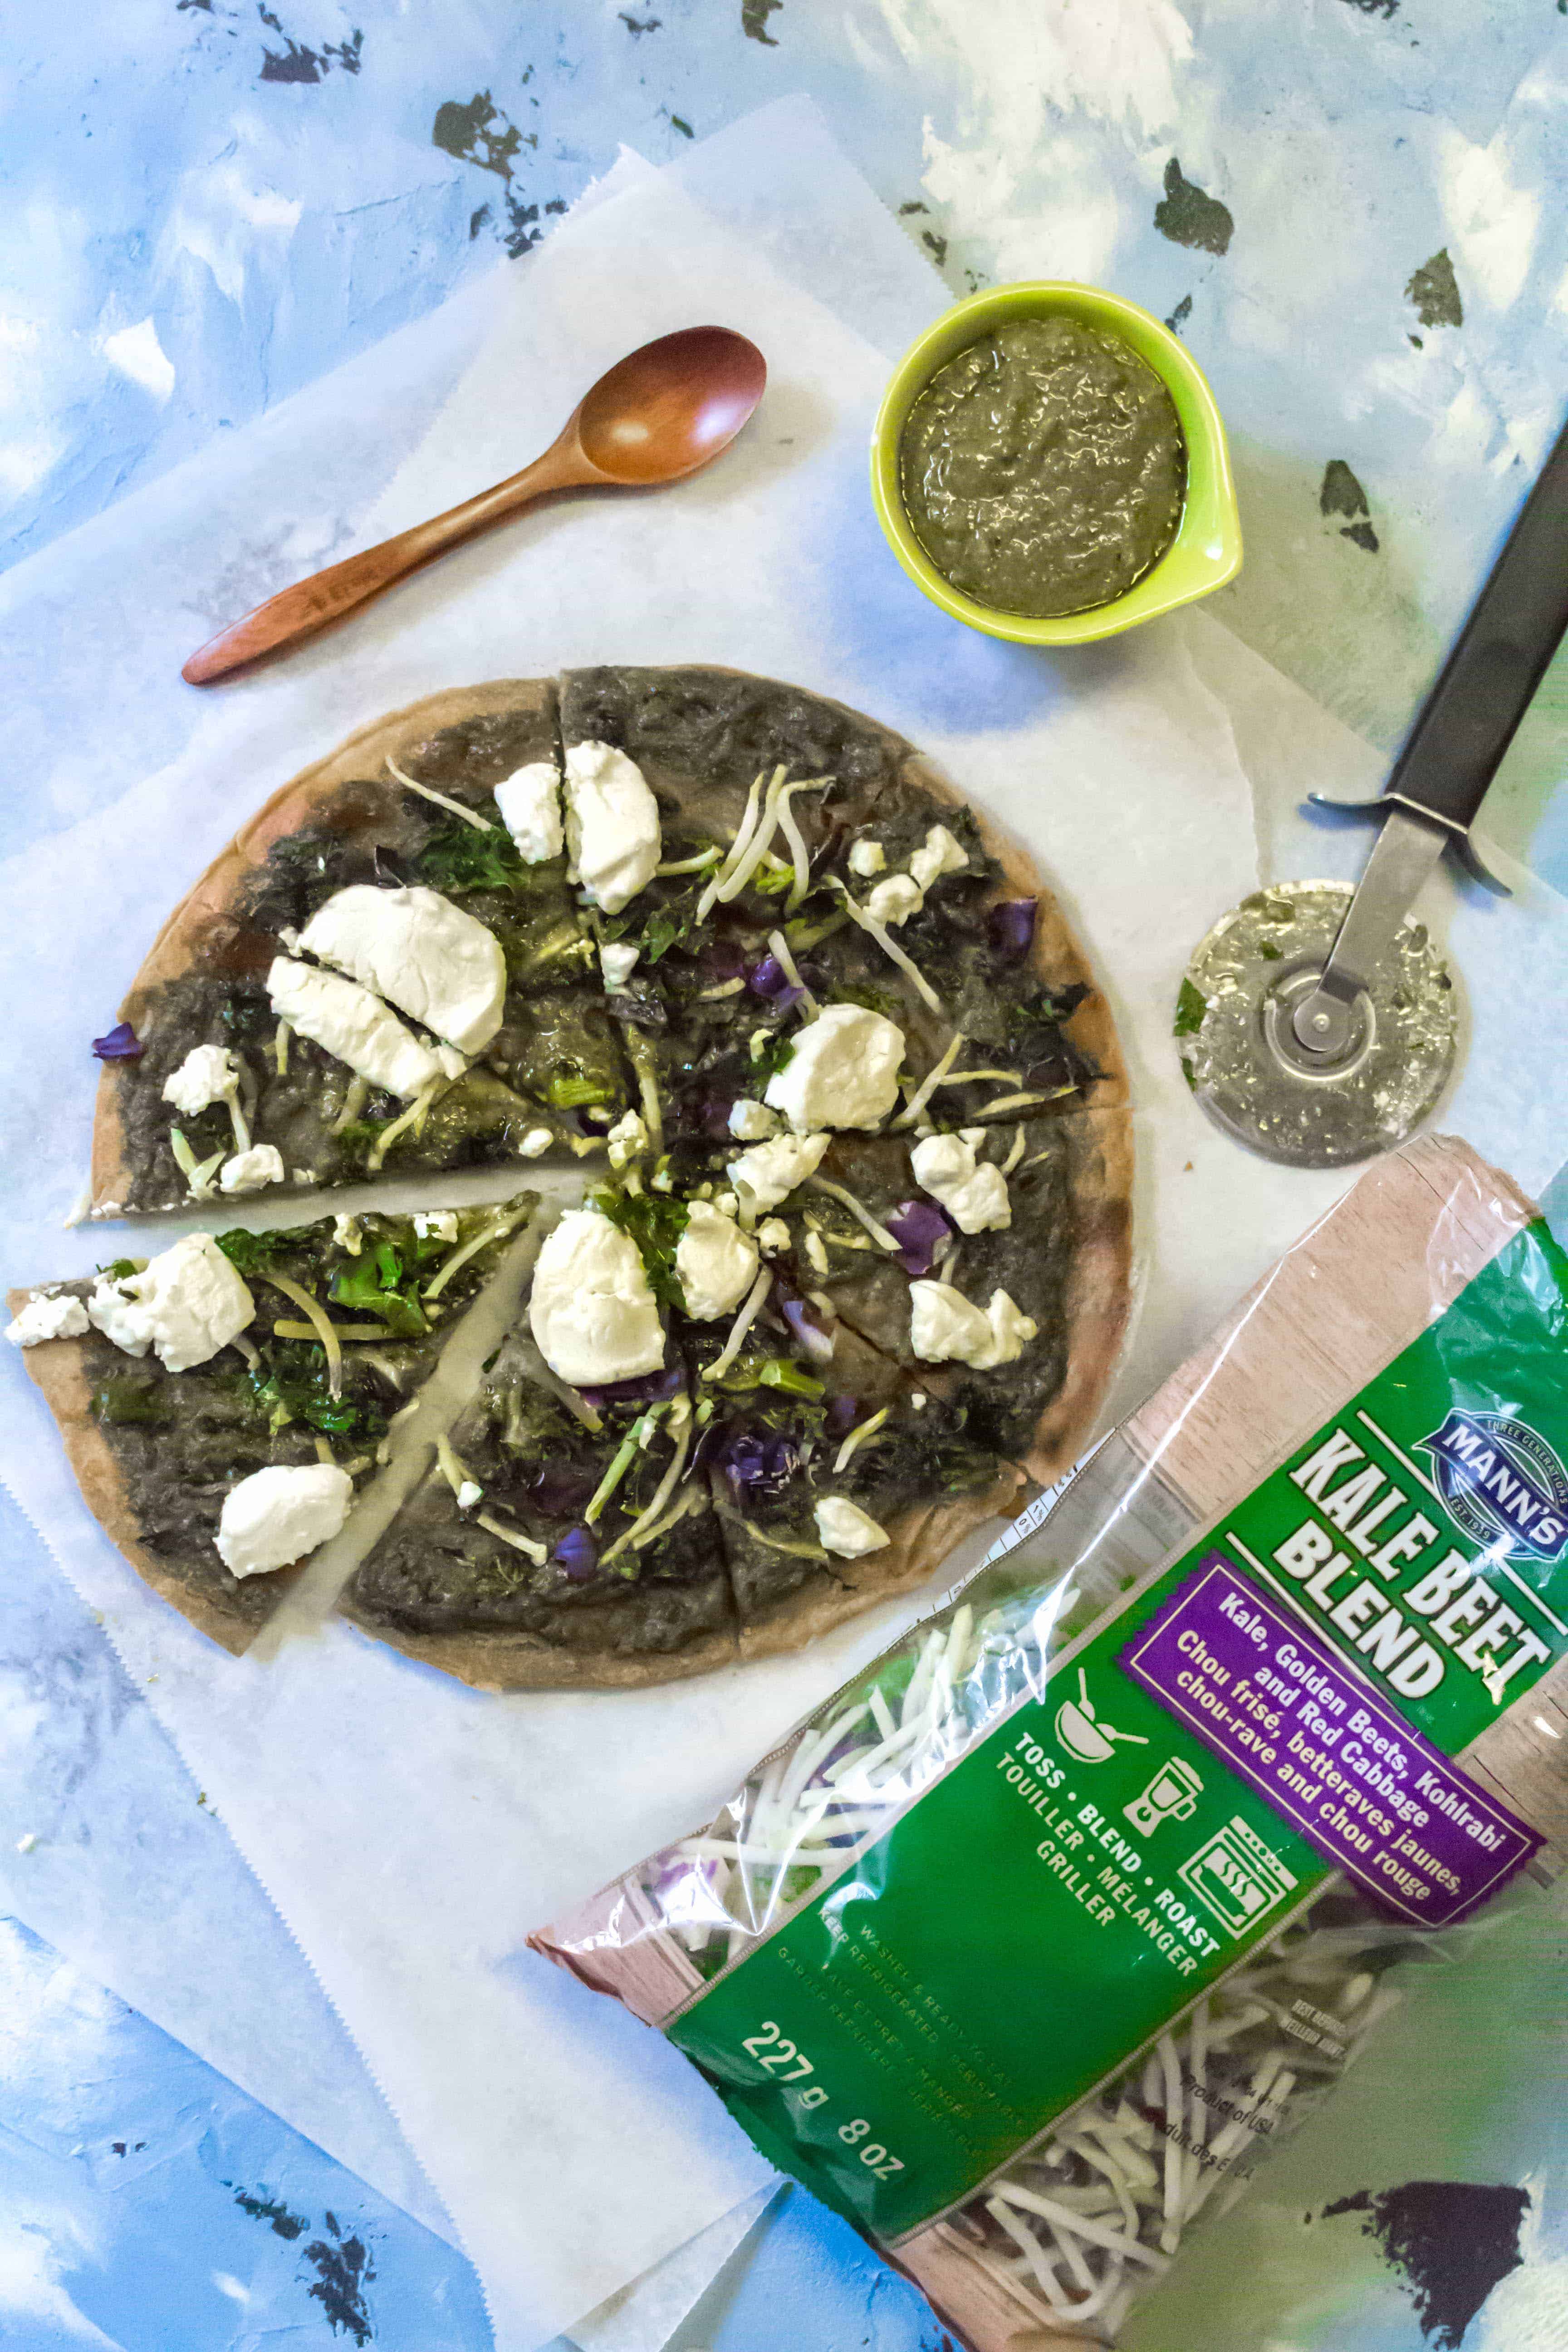 Craving some pizza but looking for a healthier alternative? Try this Kale Beet Pesto Pizza with a Chickpea Crust!